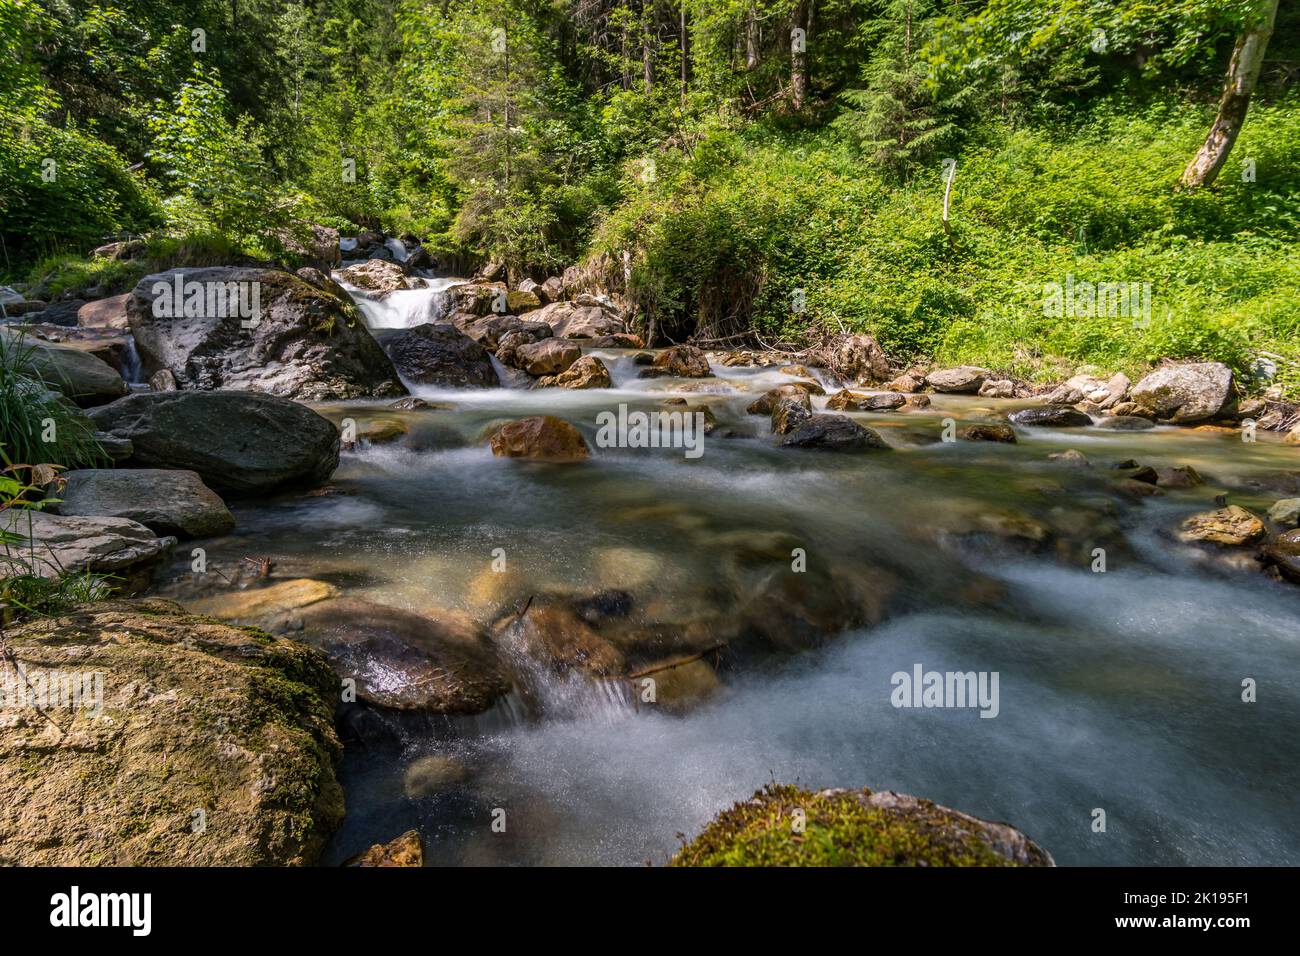 Beautiful hike to the Keilkeller waterfall near Mayrhofen in the Zillertal Alps in Austria Stock Photo